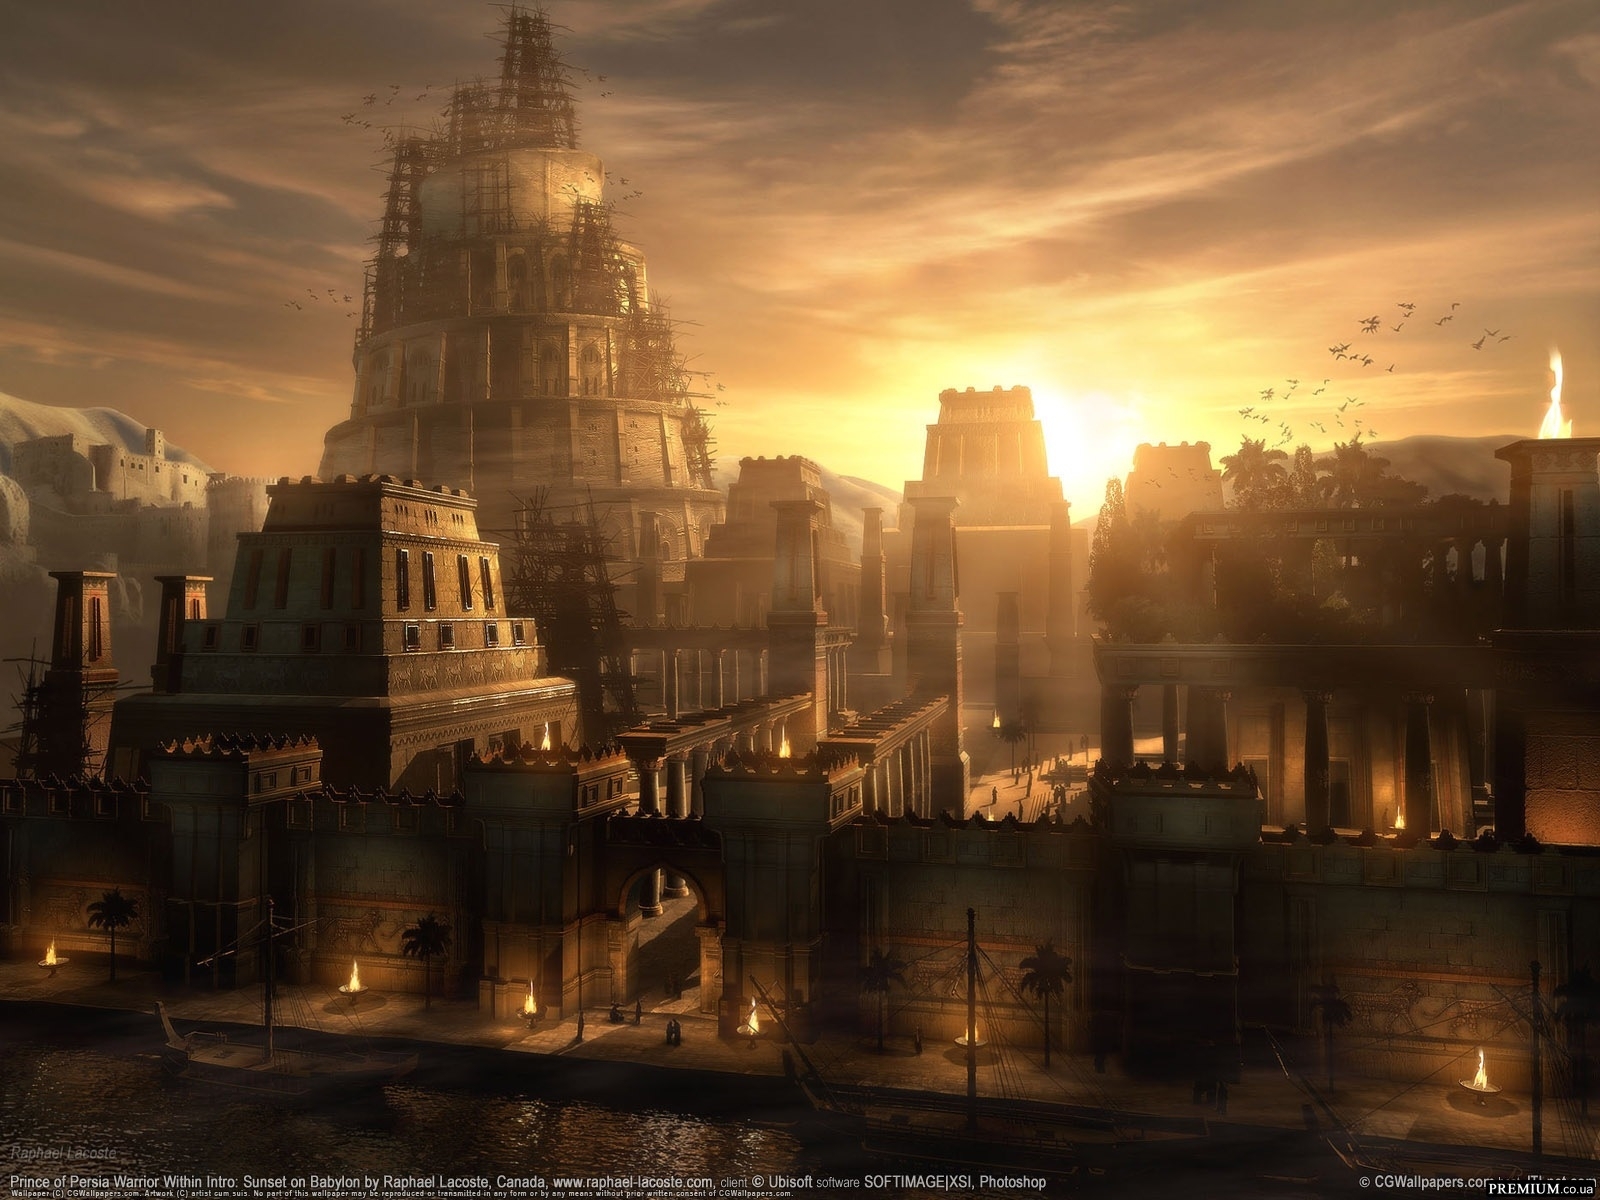 prince of persia, games, cities, architecture, orange cellphone